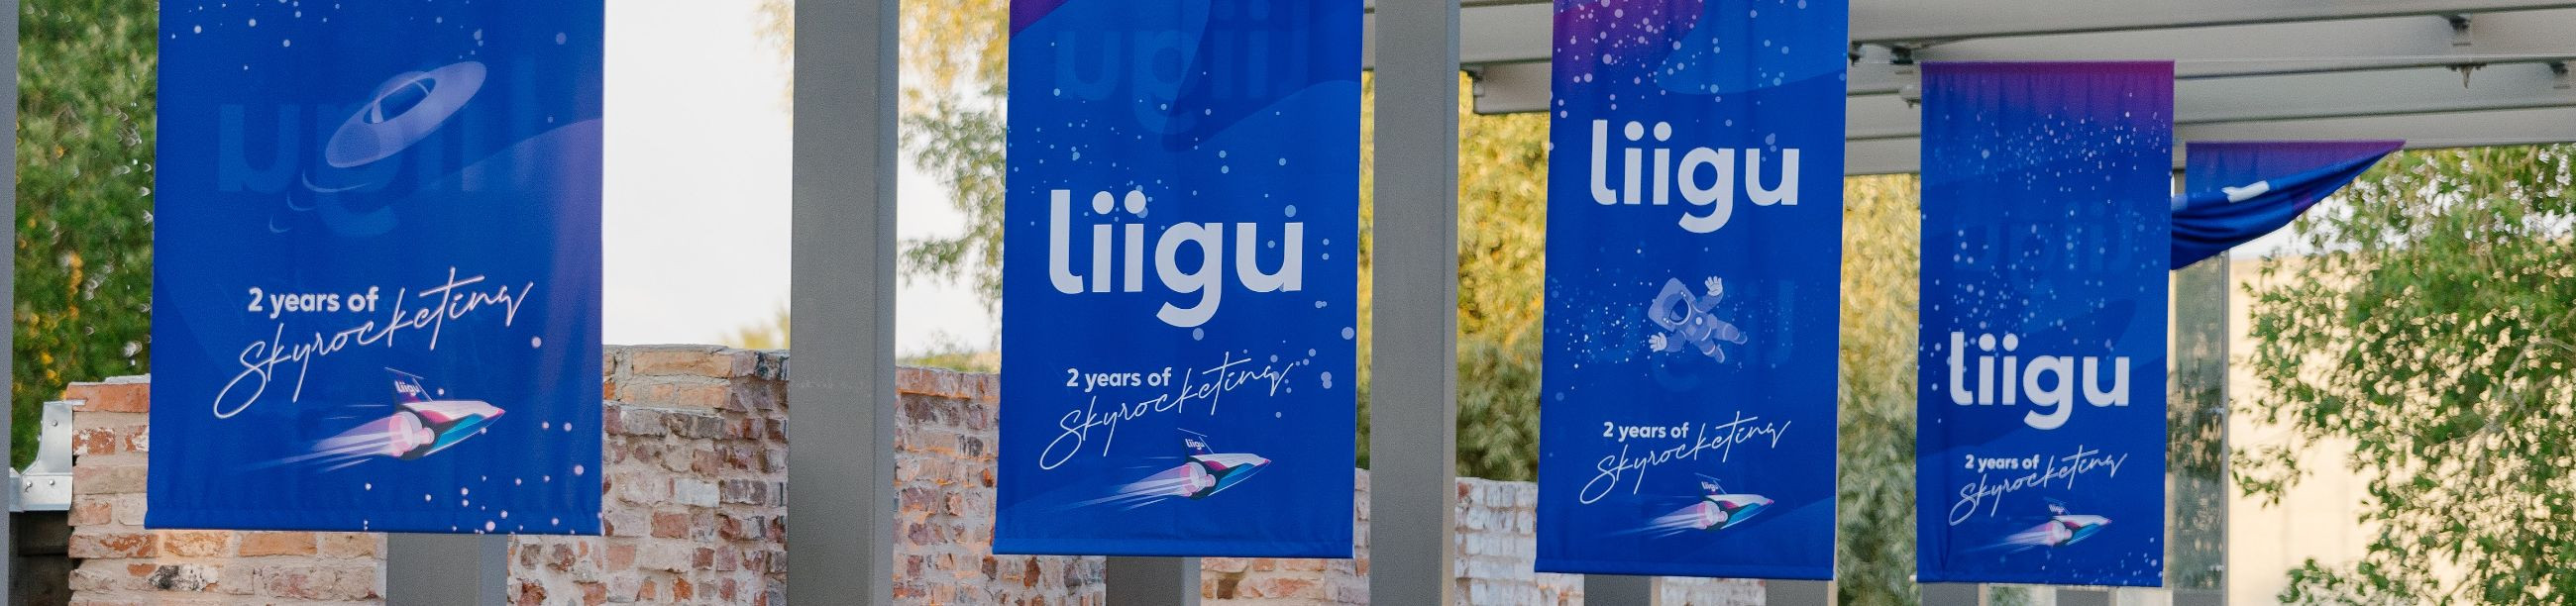 Liigu offers smart and contactless car rental in Southern Europe. More than 10,000 satisfied customers have chosen Liigu's innovative car rental experience.